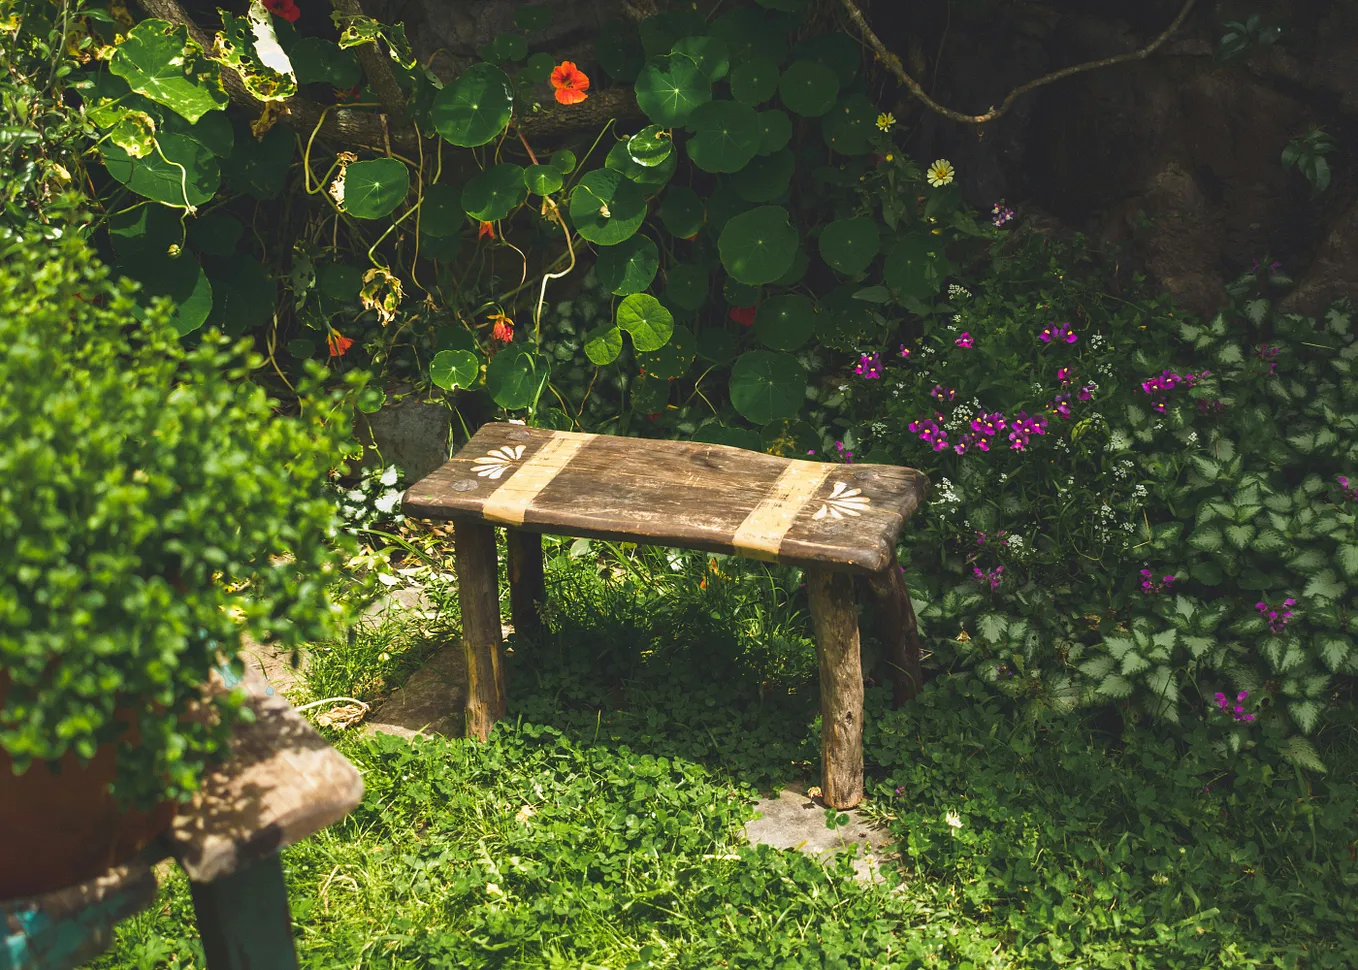 A small brown wooden bench/stool in a lush green garden with small flowers in the background.